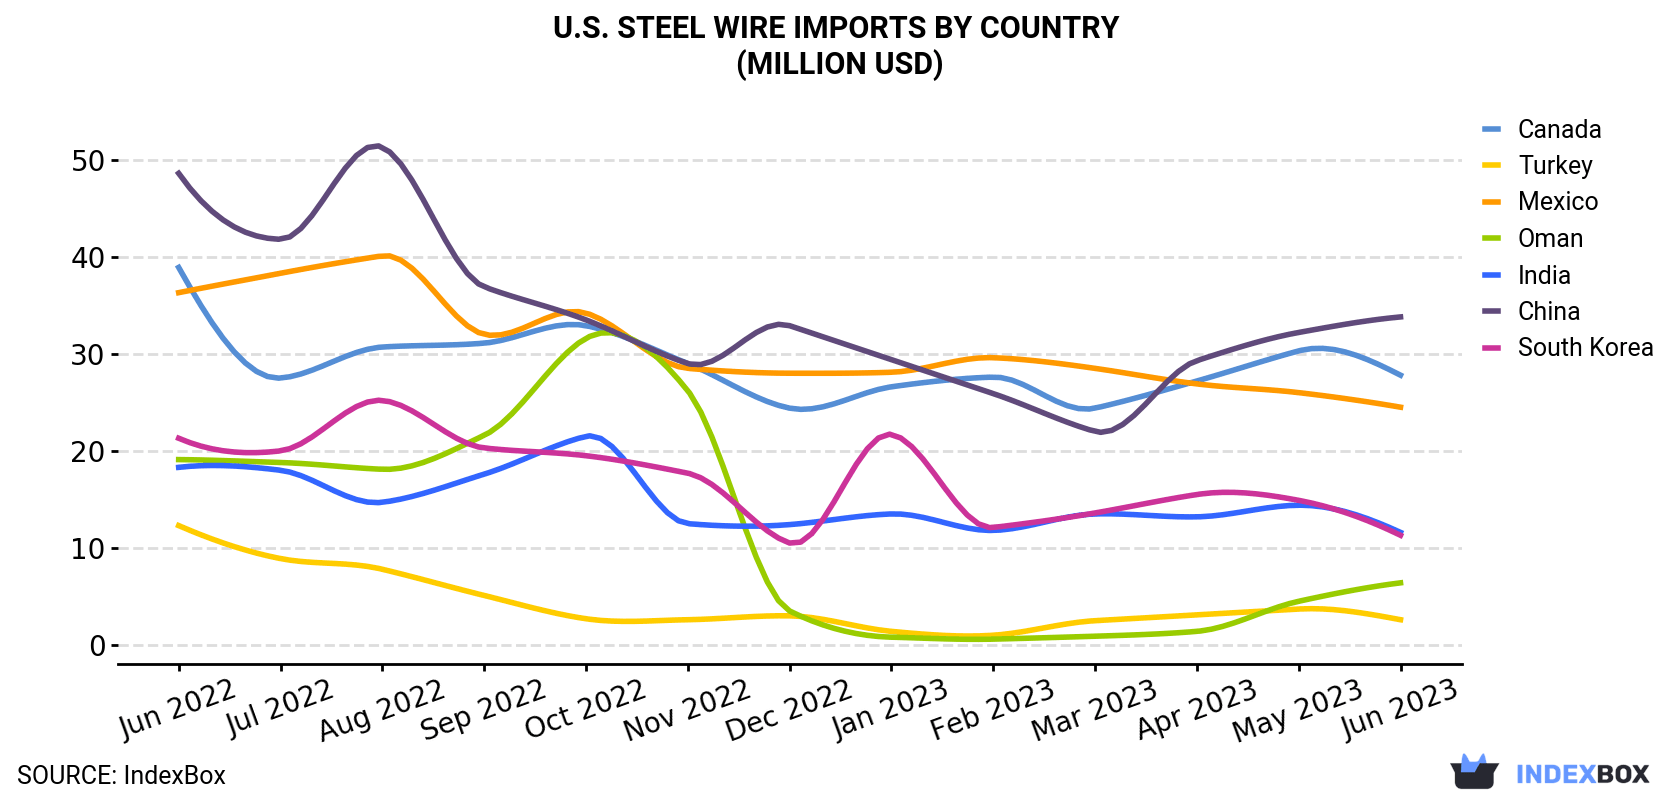 U.S. Steel Wire Imports By Country (Million USD)